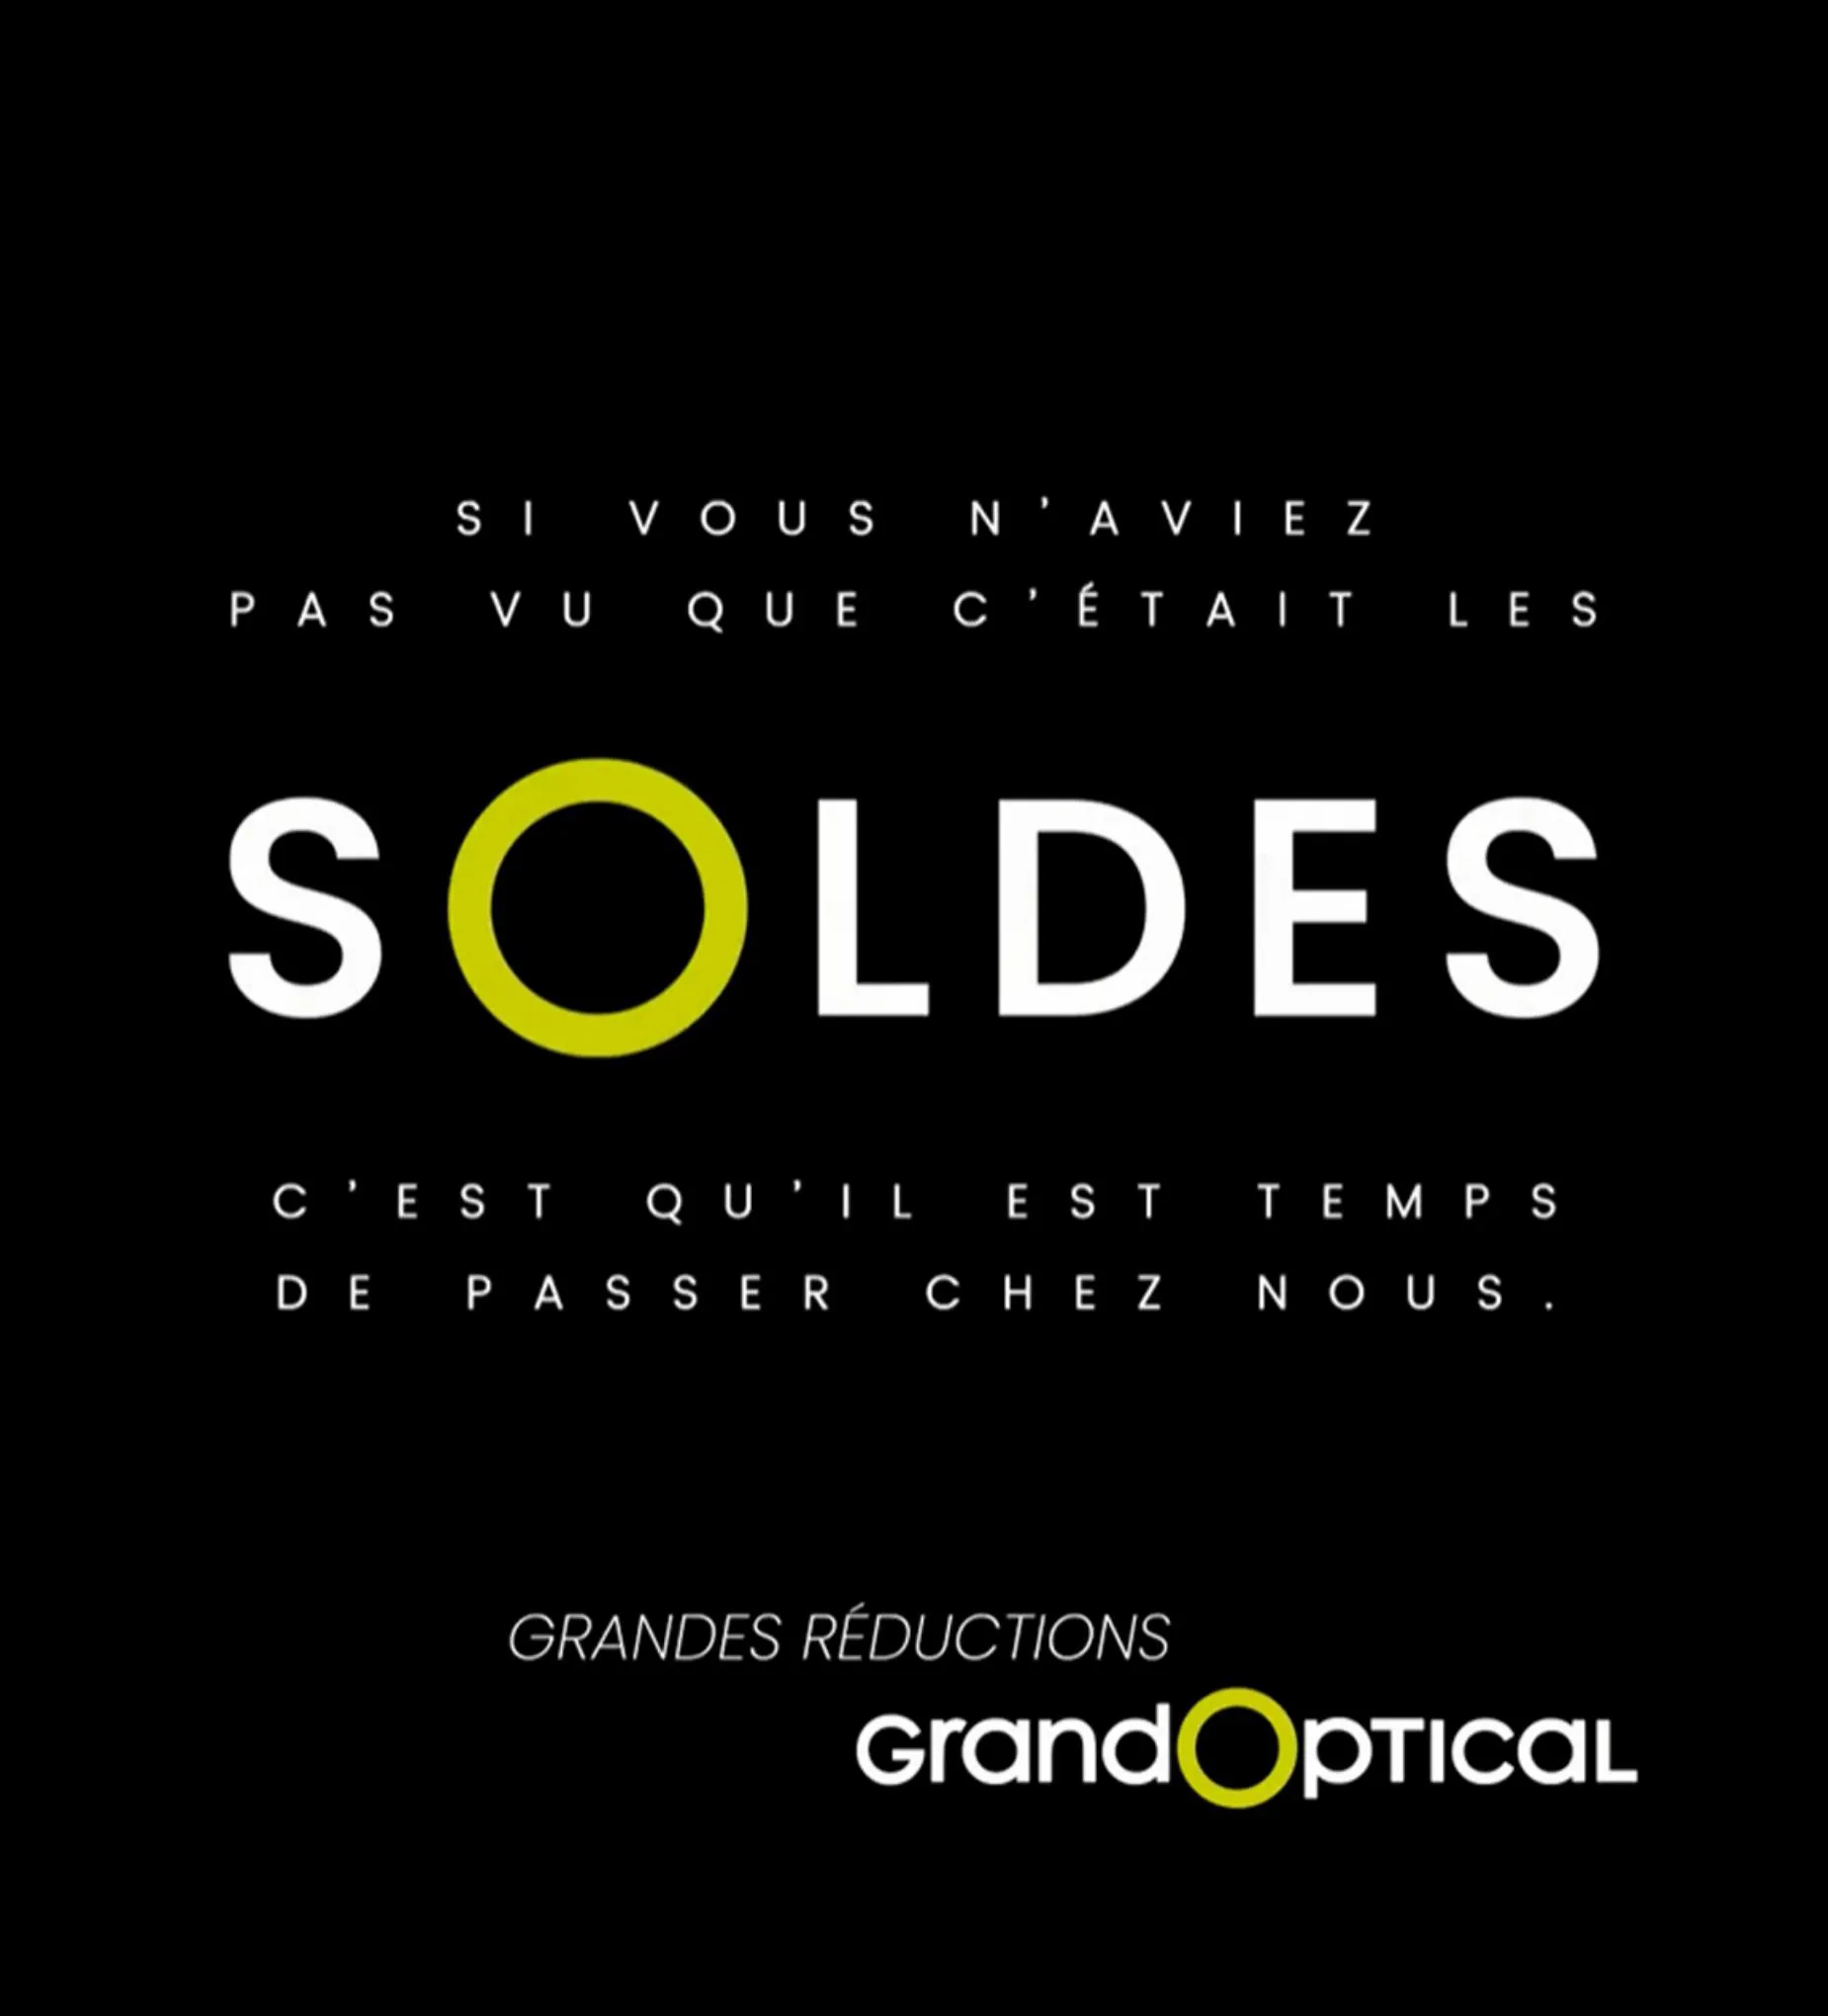 Catalogue Soldes Grand Optical, page 00001